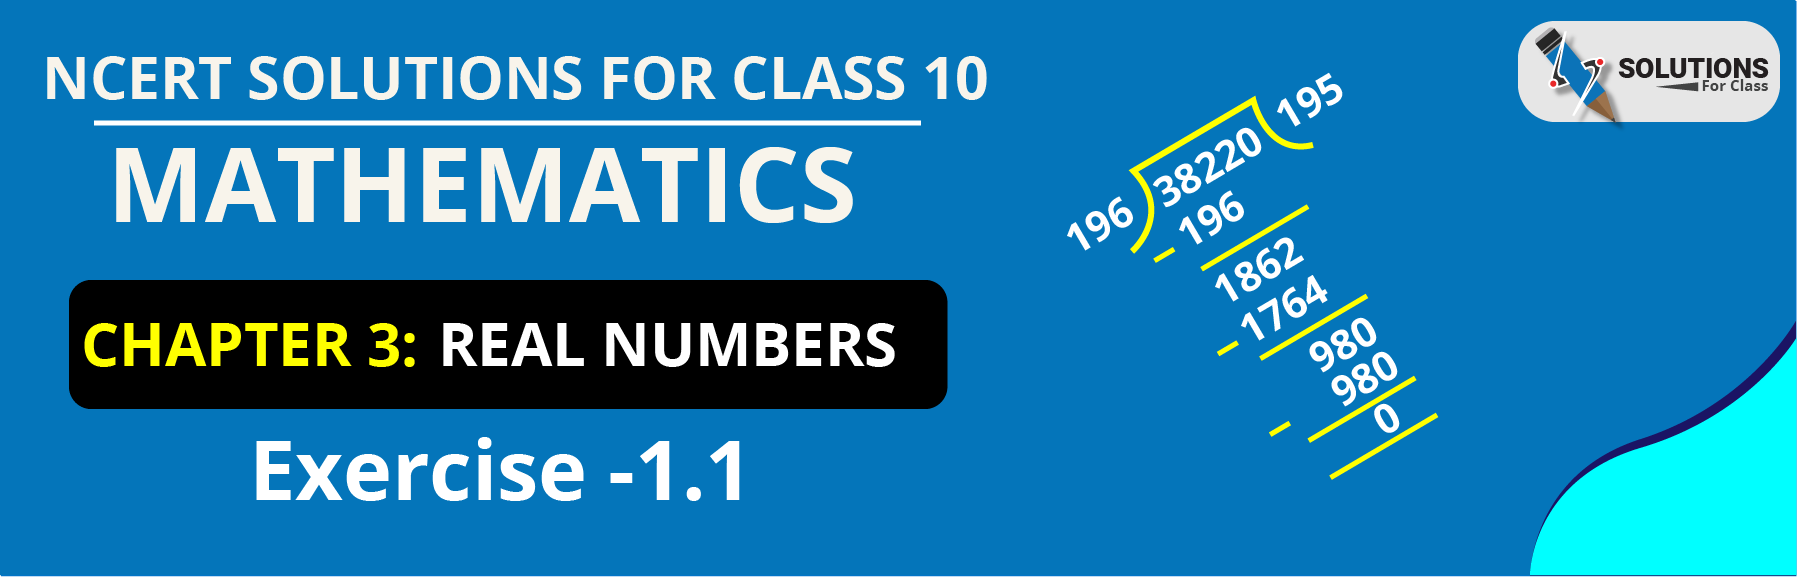 NCERT Solutions For Class 10, Maths, Chapter 1, Real Numbers, Exercise 1.1